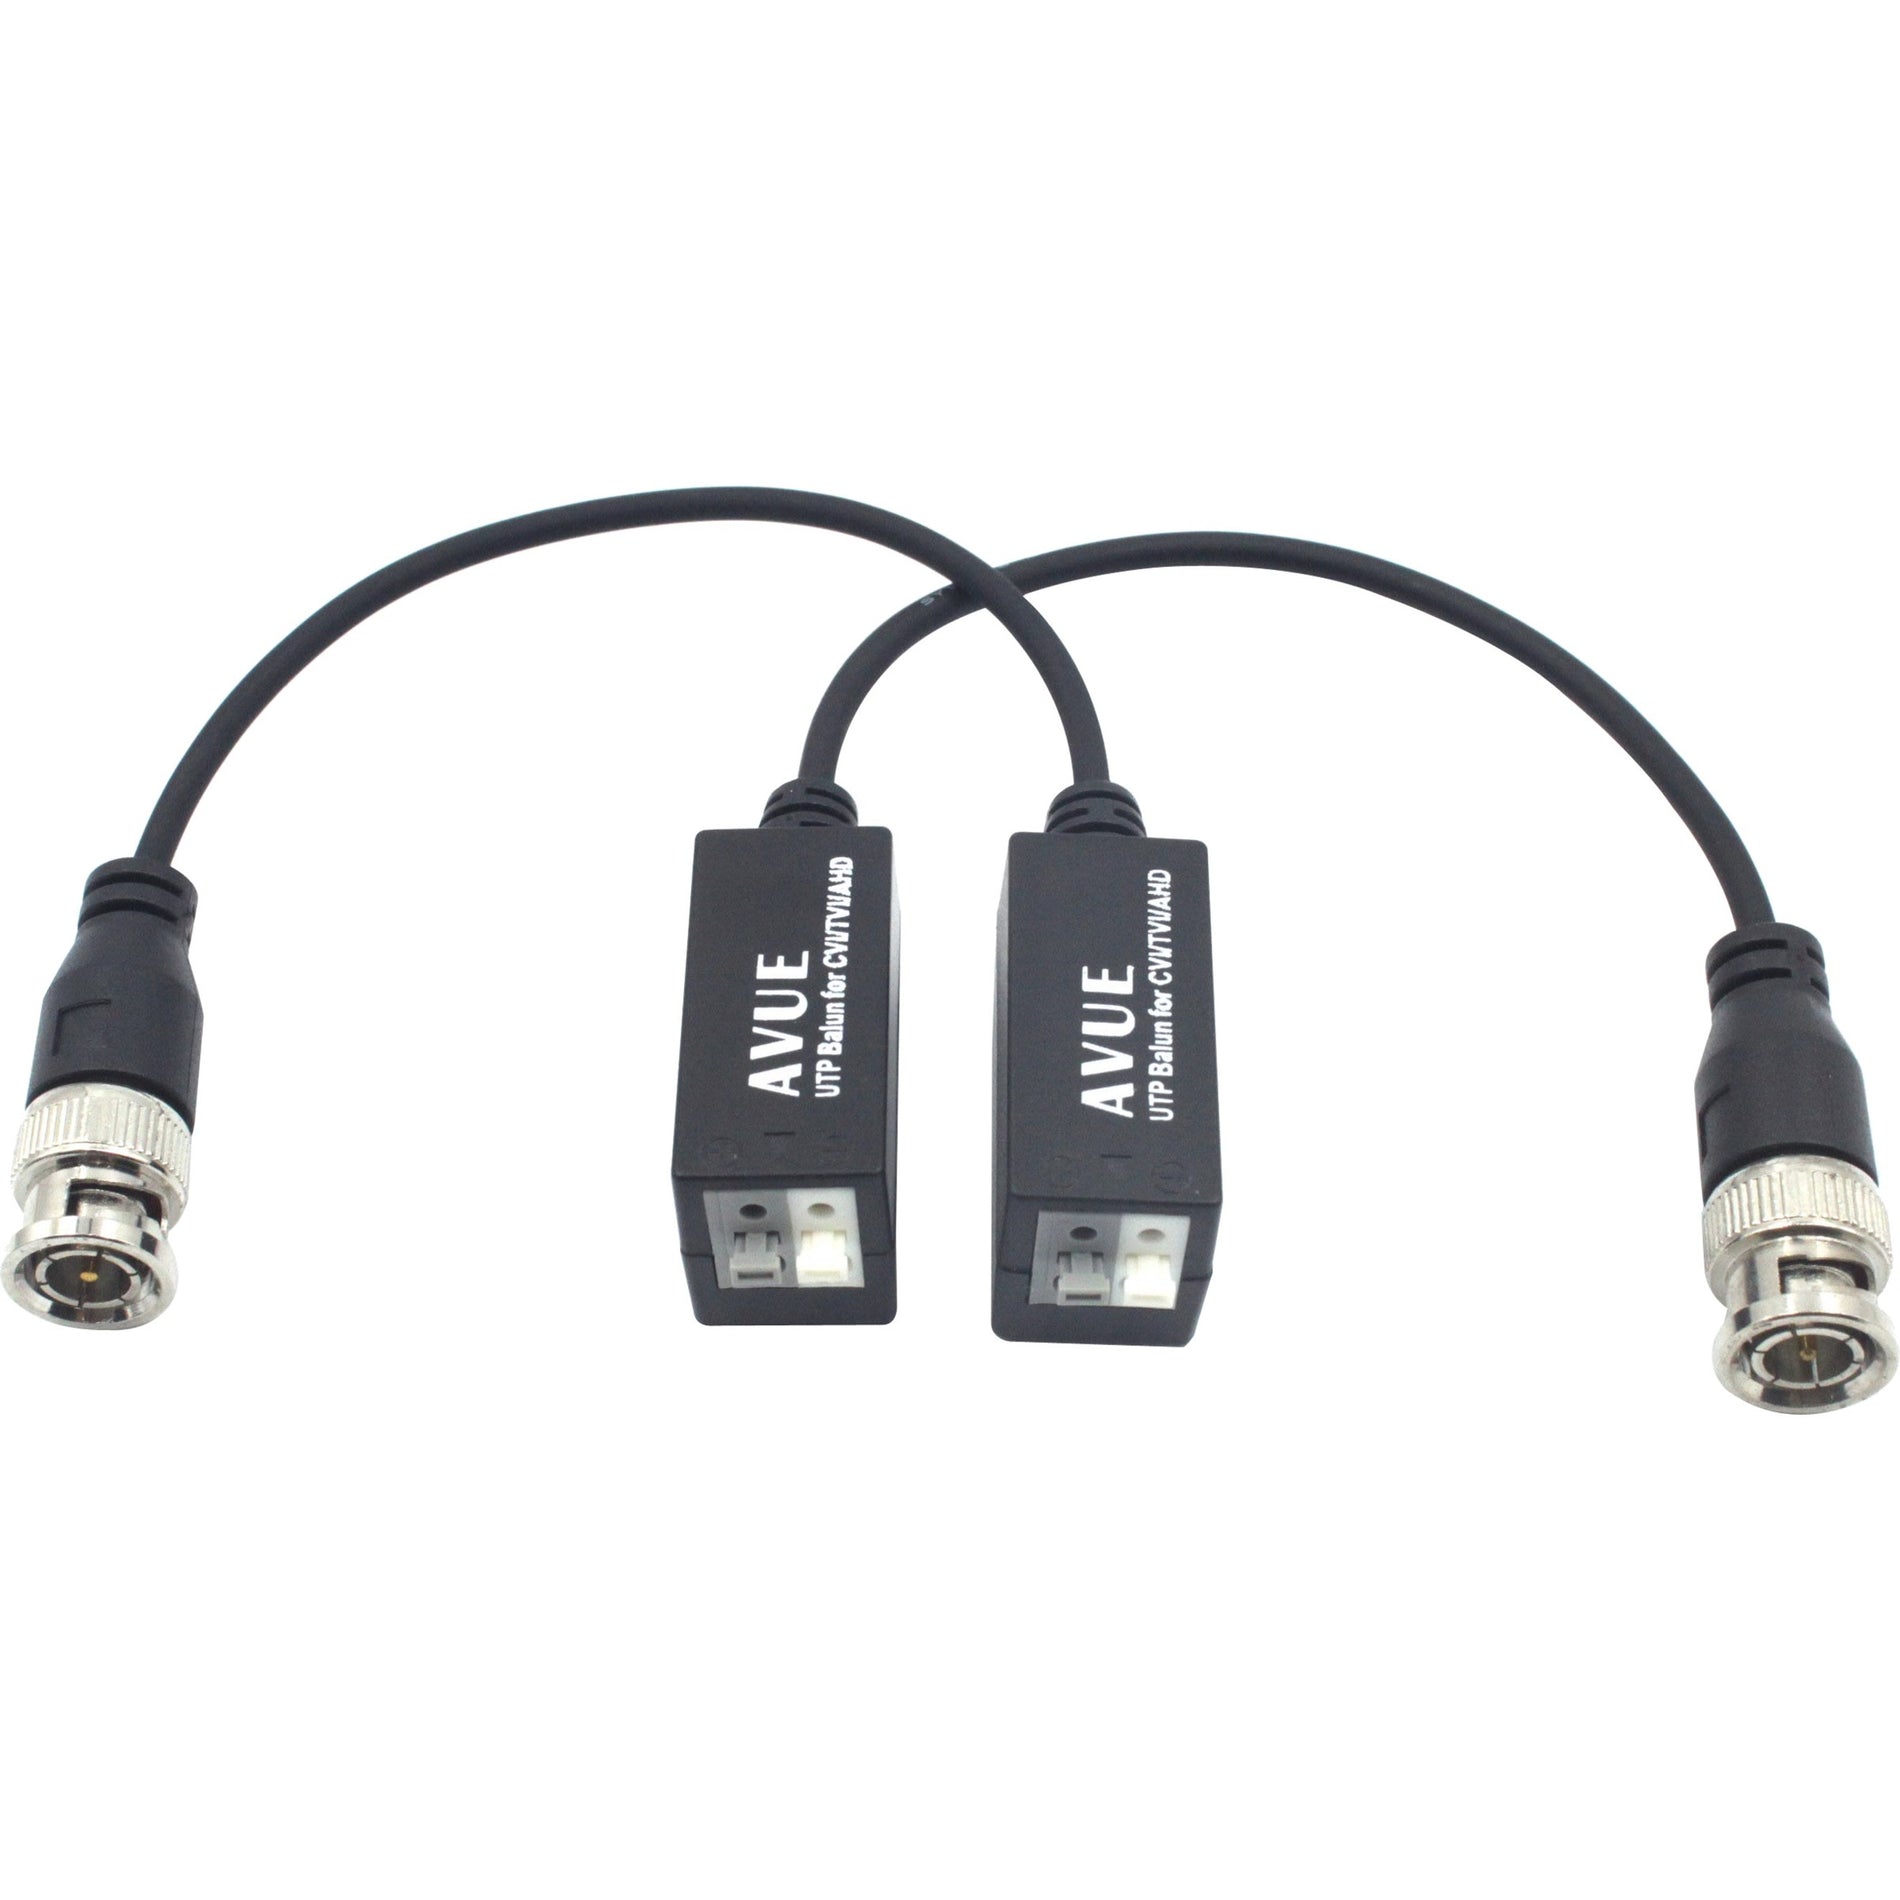 Avue AVB301P HD Video Transceiver W/ Pigtail, 2000 ft Maximum Operating Distance, Composite Video In/Out, 100 Ohm Impedance